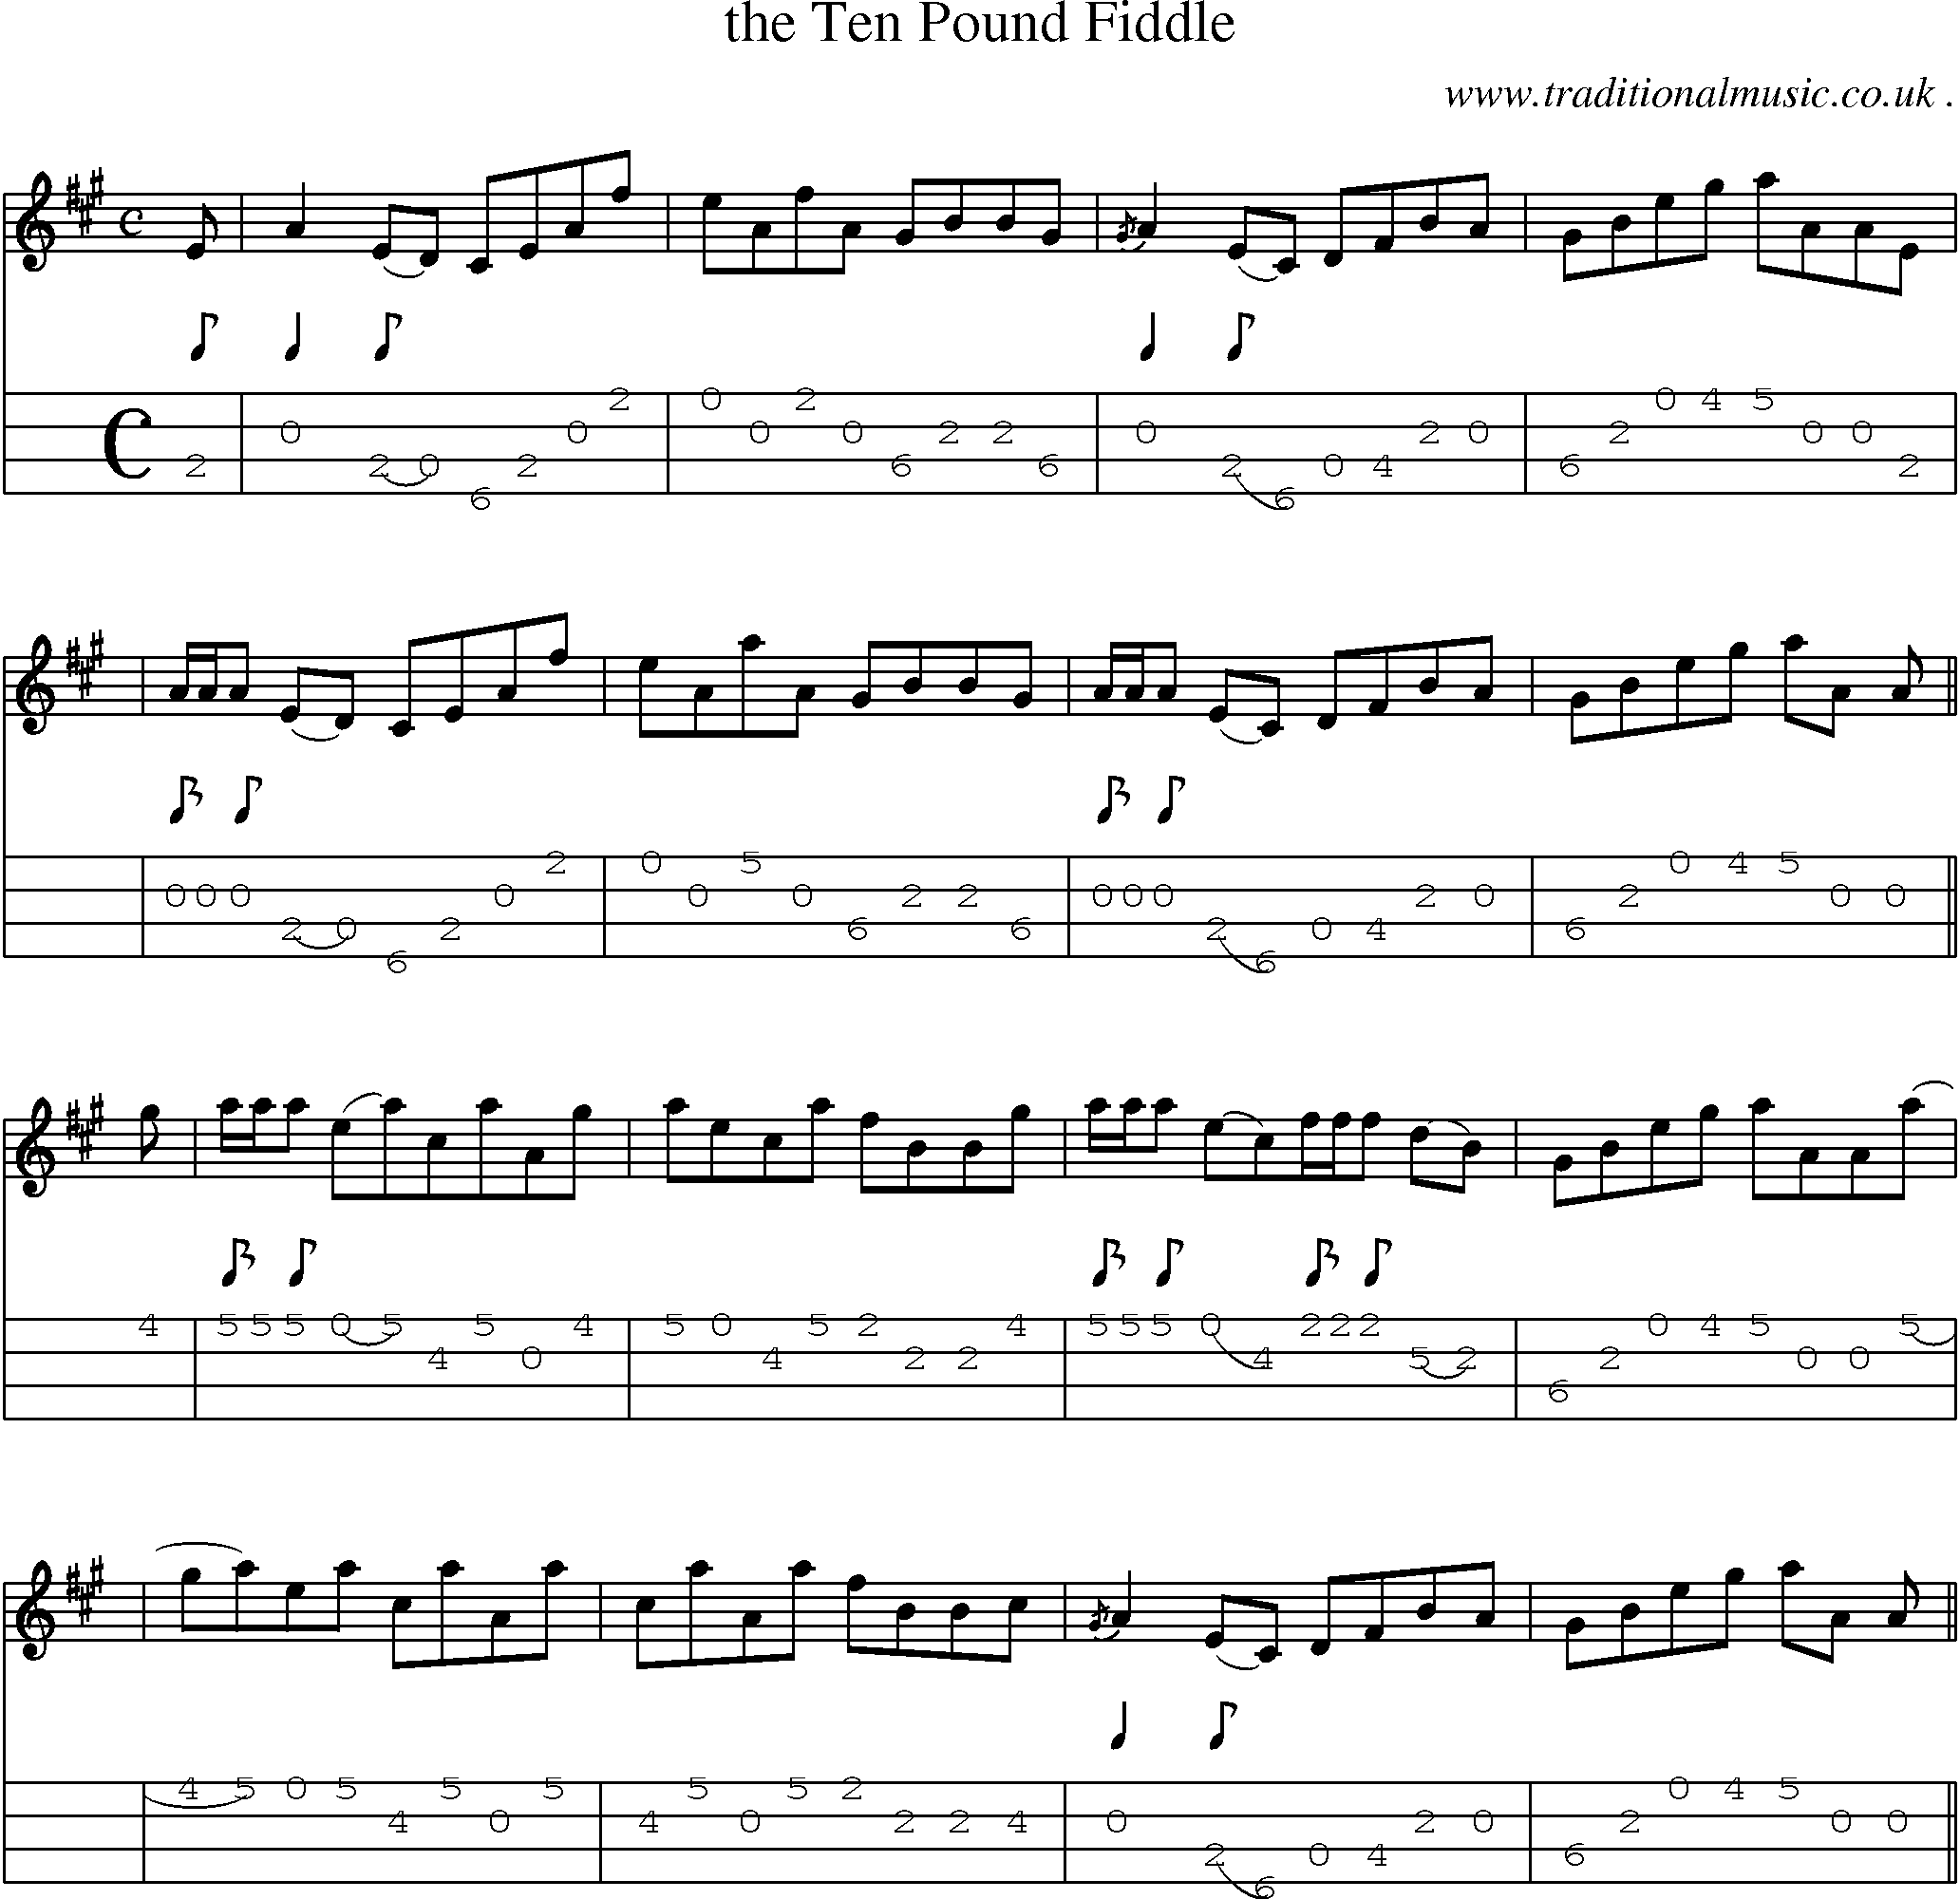 Sheet-music  score, Chords and Mandolin Tabs for The Ten Pound Fiddle